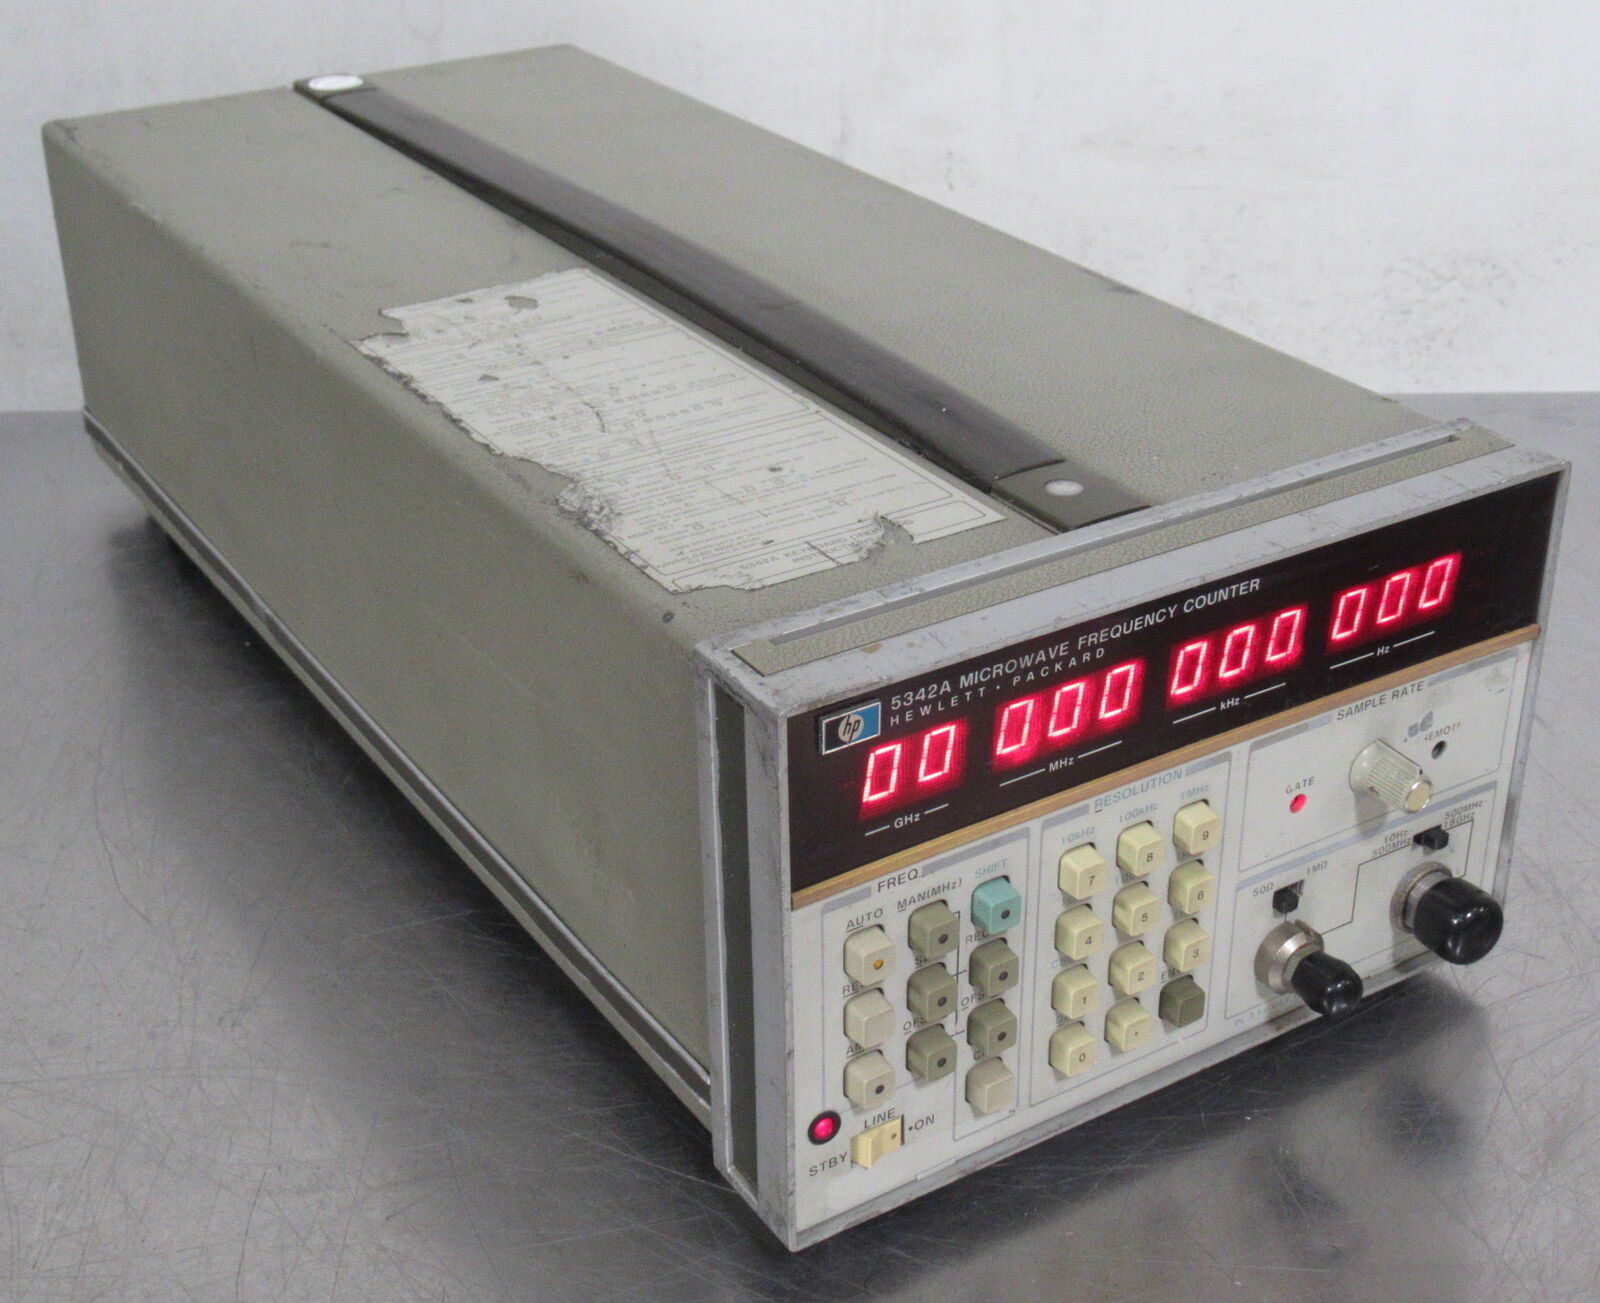 T177742 Hp 5342a Microwave Frequency Counter W/ Options 001, 003, 011